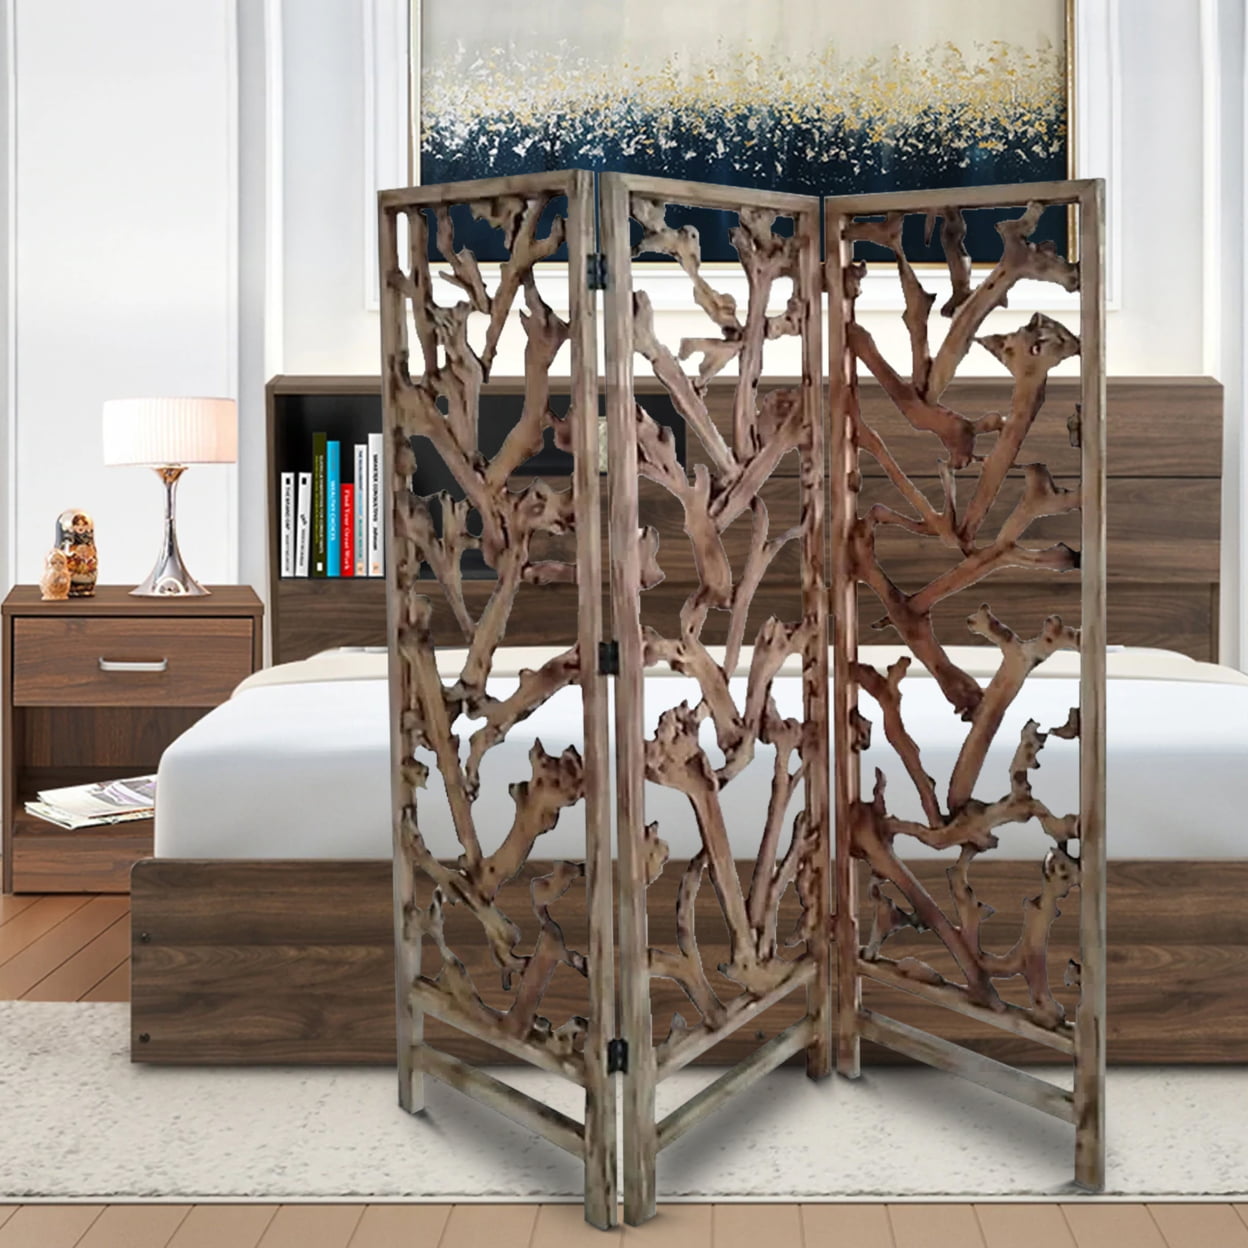 Picture of Benjara BM220198 3 Panel Wooden Screen with Mulberry Alpine Like Branches Design, Brown